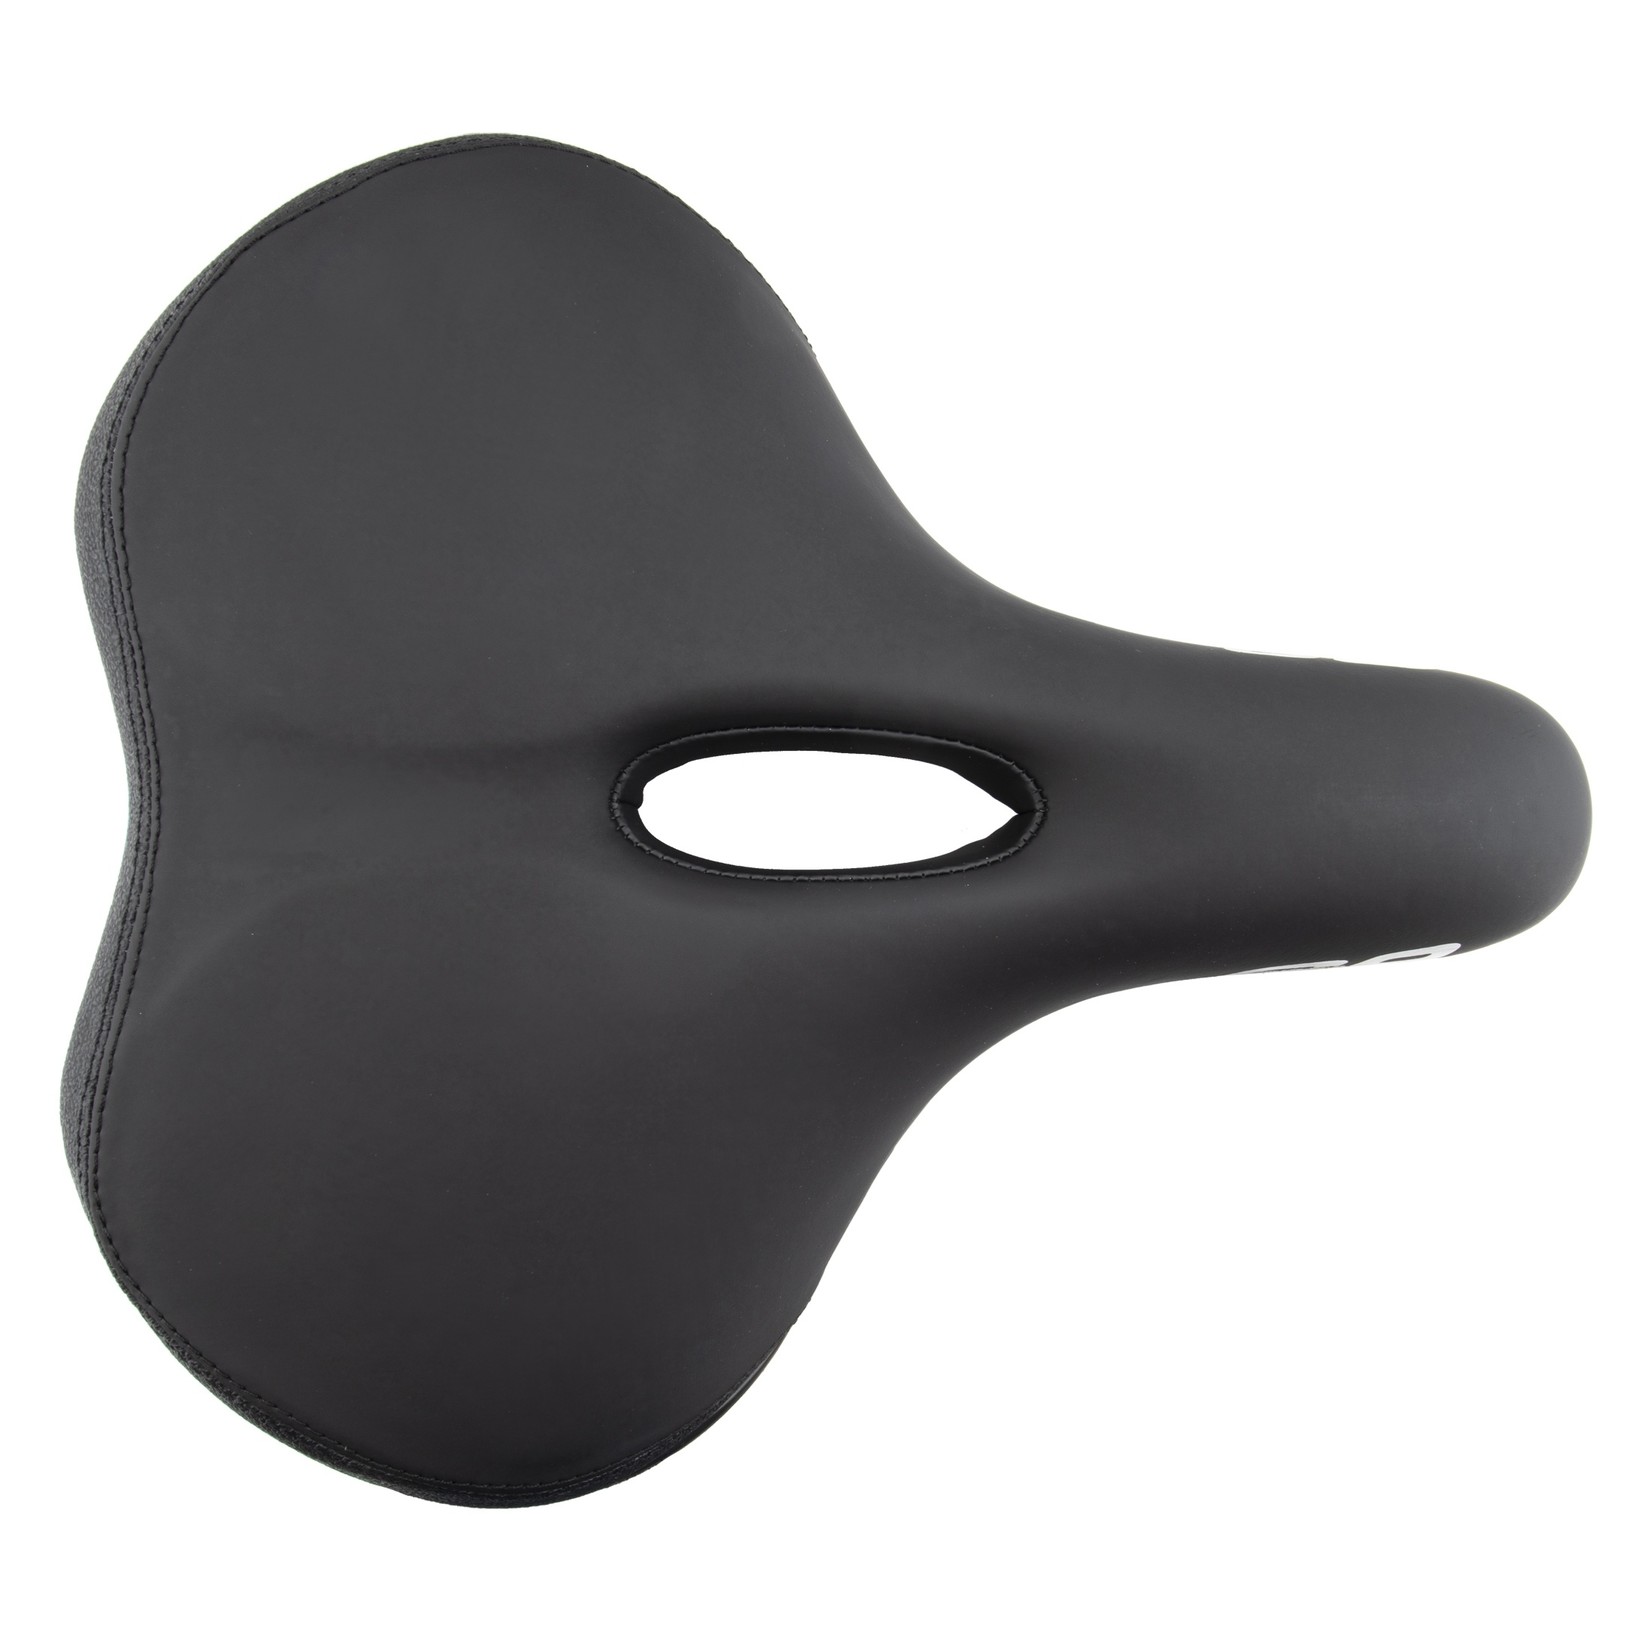 C9 Support XL Air Flow Saddle